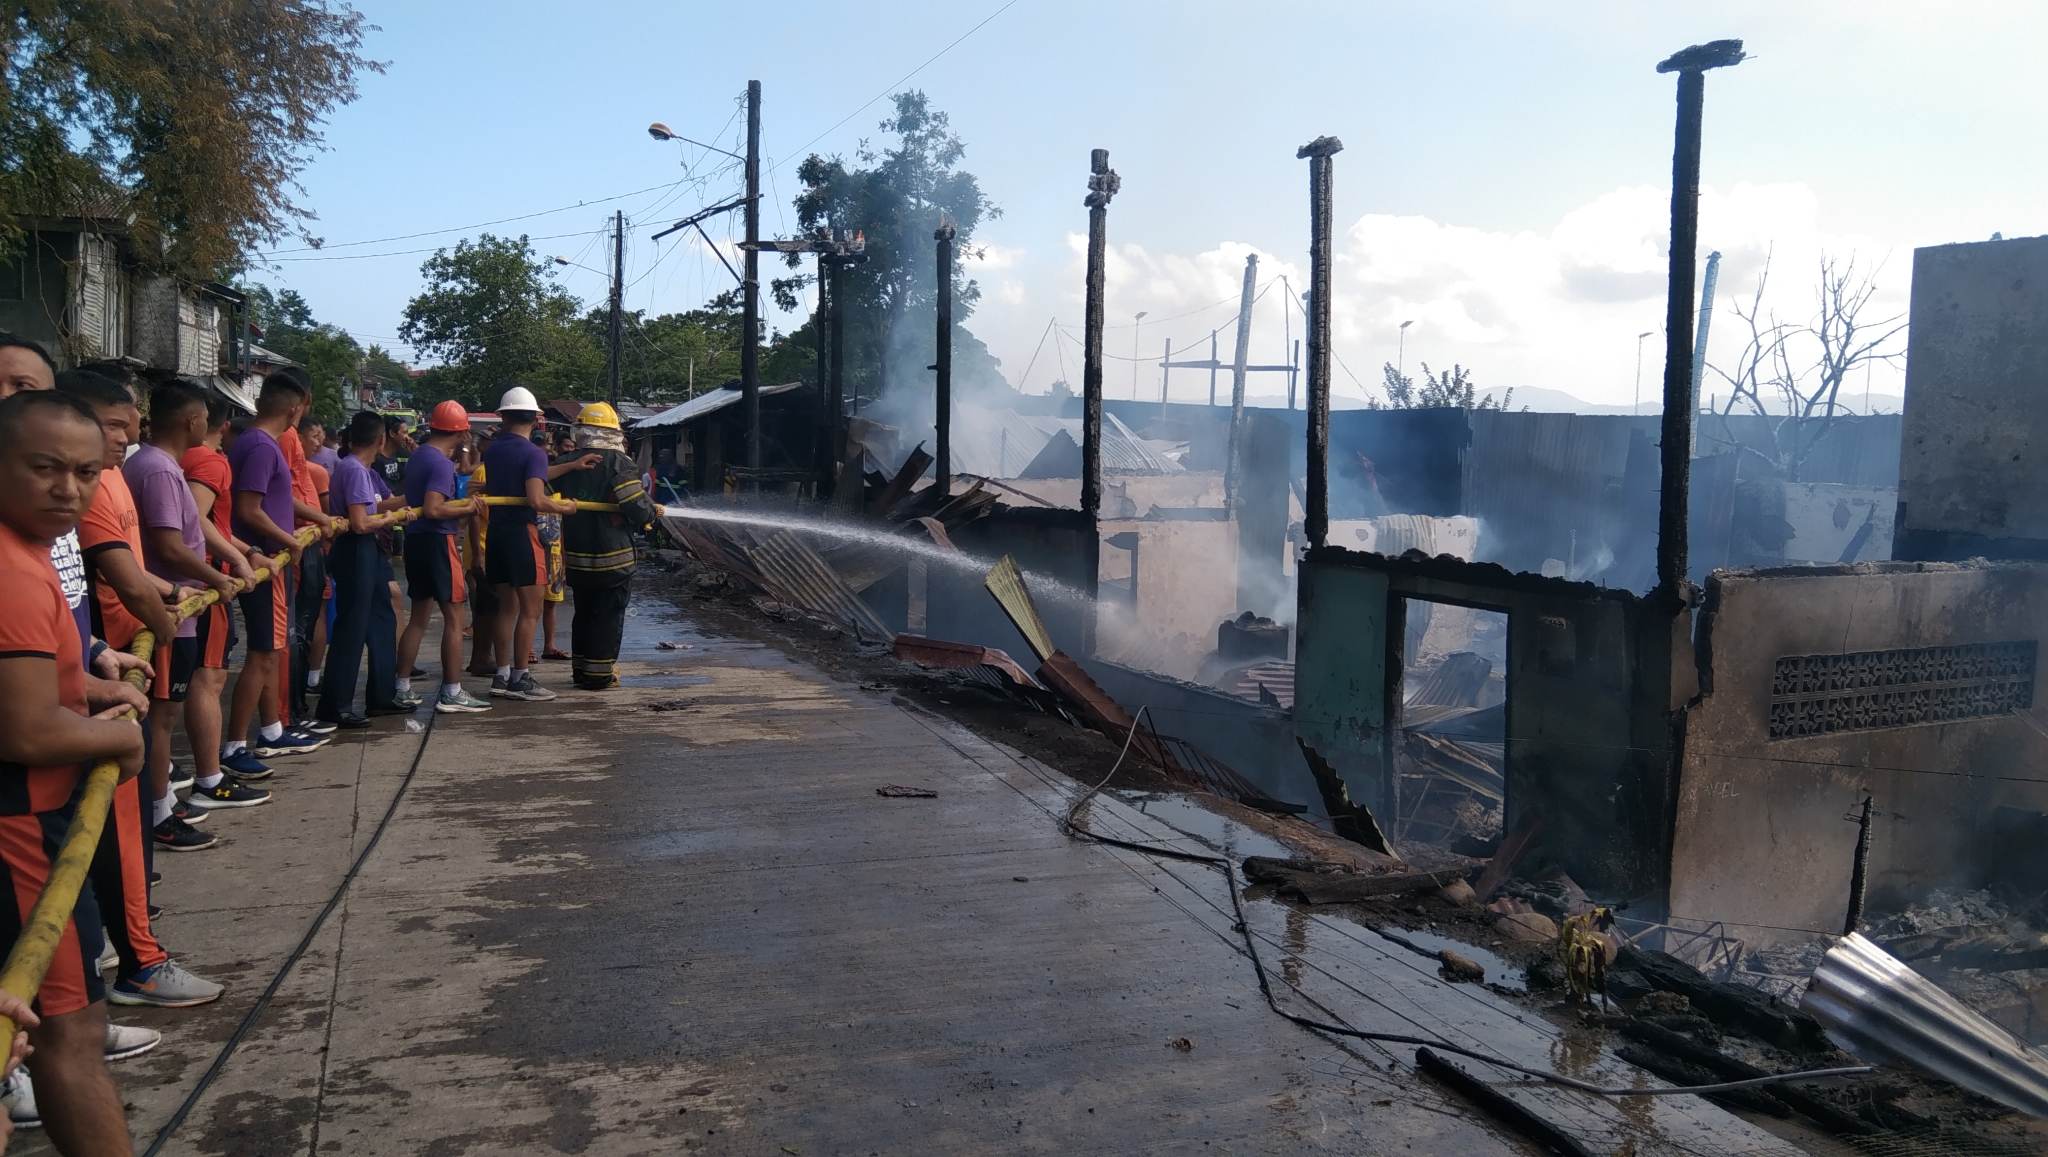 Firemen attempt to douse the fire that hit 20 houses spread between three villages in Puerto Princesa City in Palawan province on Wednesday